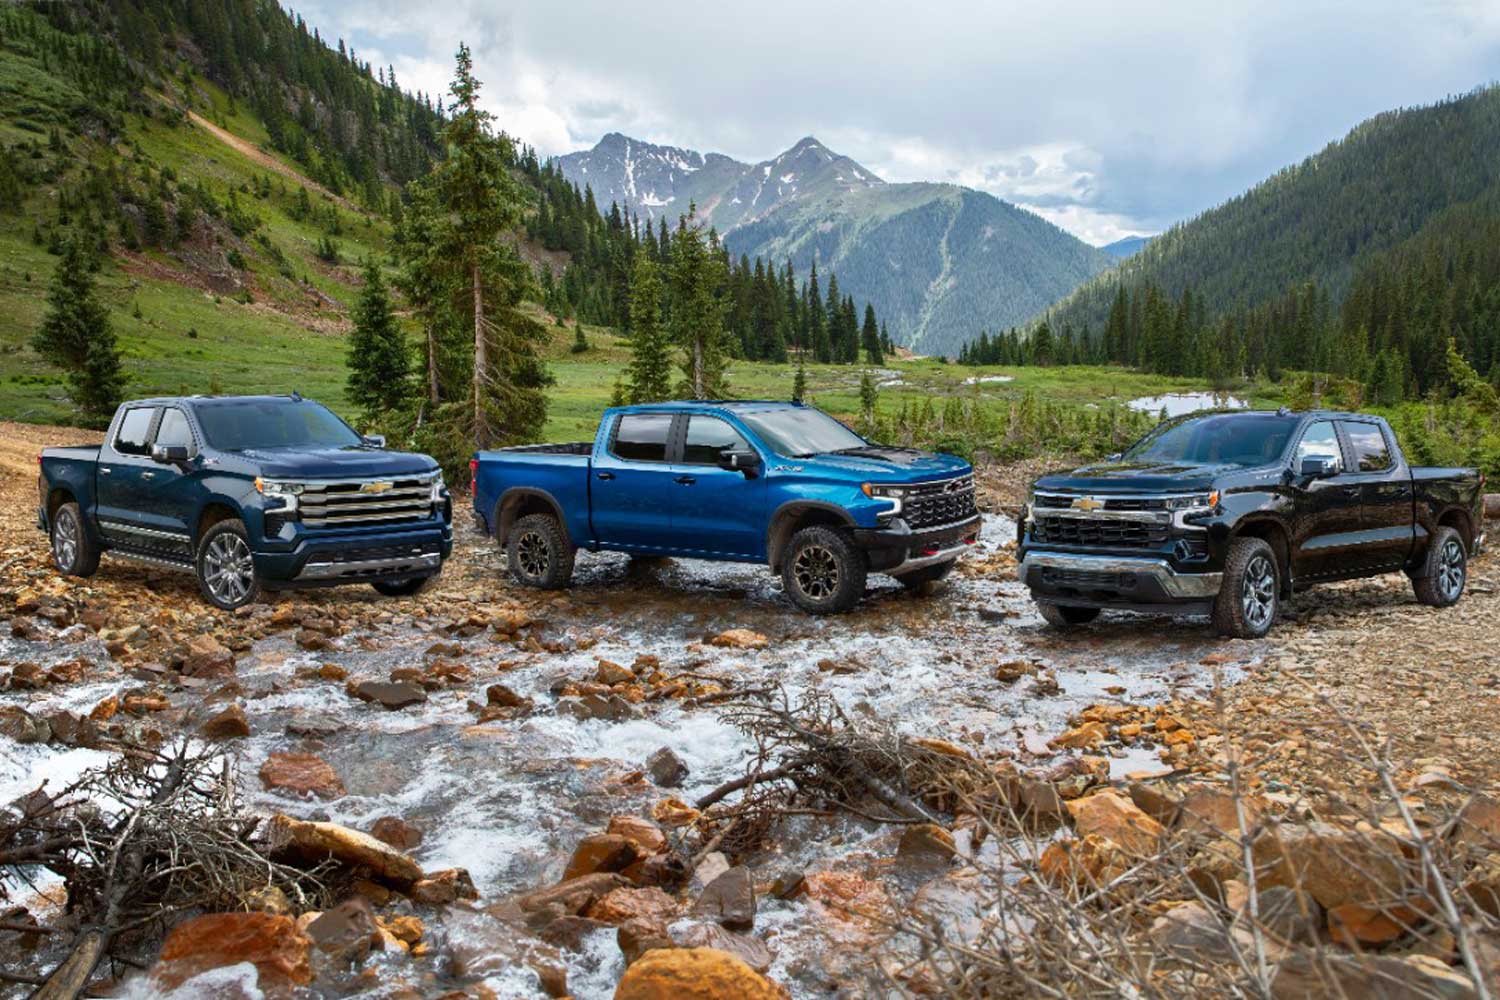 2022 Chevrolet Silverado High Country, ZR2, and LT models in blue